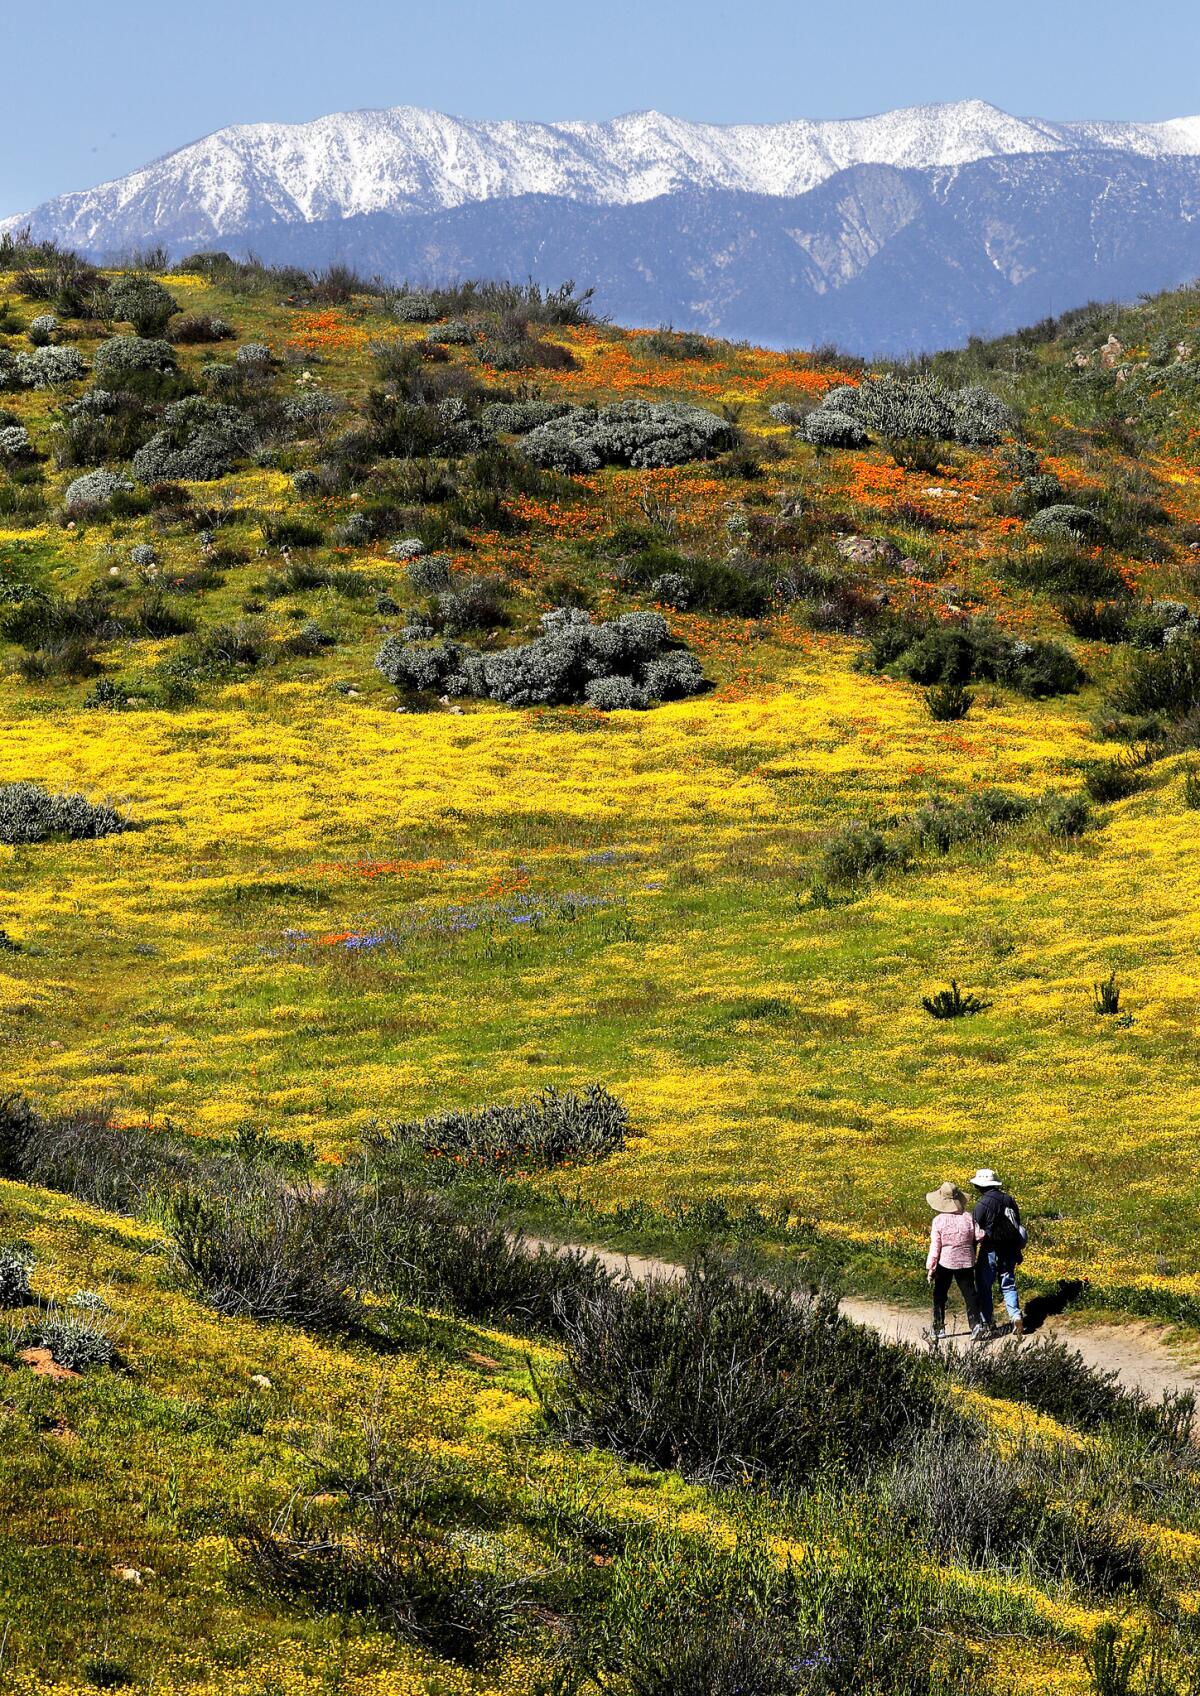 Visitors to Diamond Valley Lake in Hemet follow a trail through hills covered in wildflowers with the snow-capped San Bernardino Mountains in the distance.